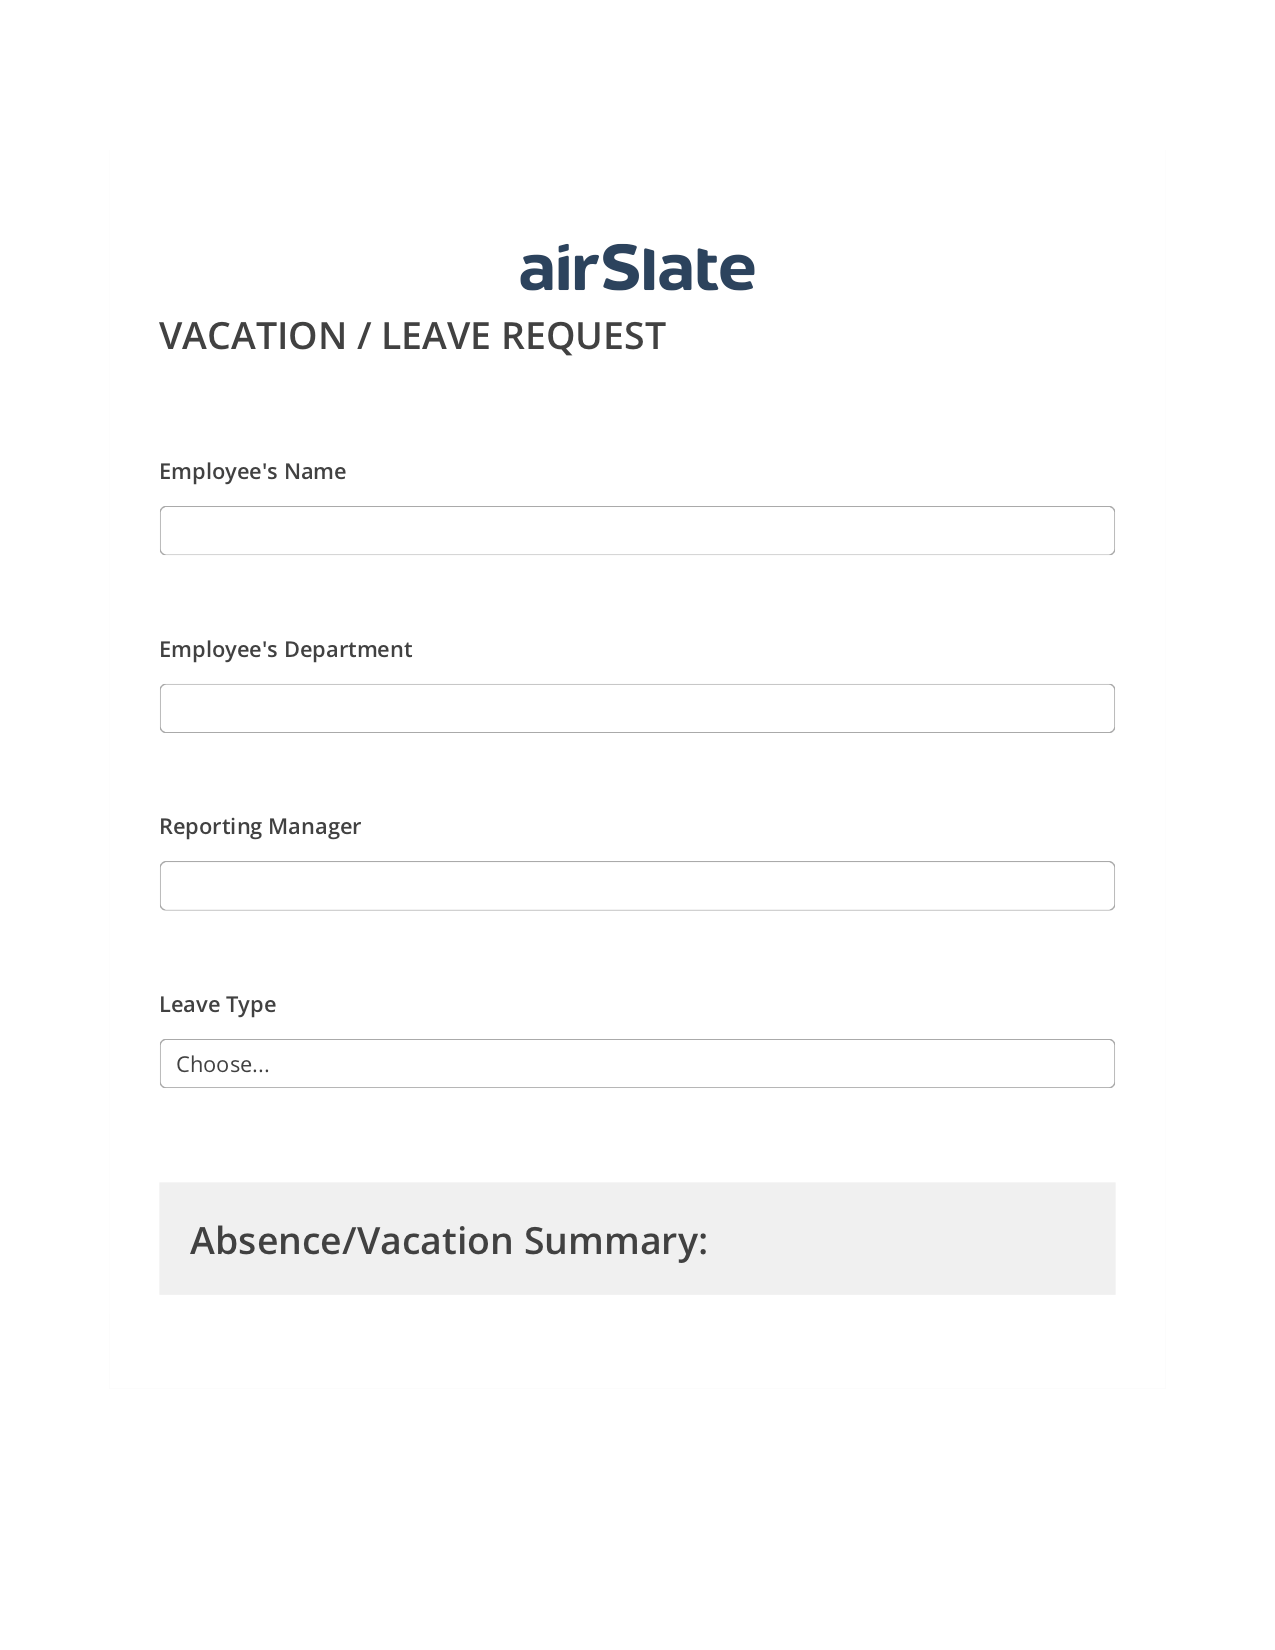 Vacation/Leave Request Workflow Pre-fill from CSV File Bot, Create slate bot, Archive to OneDrive Bot